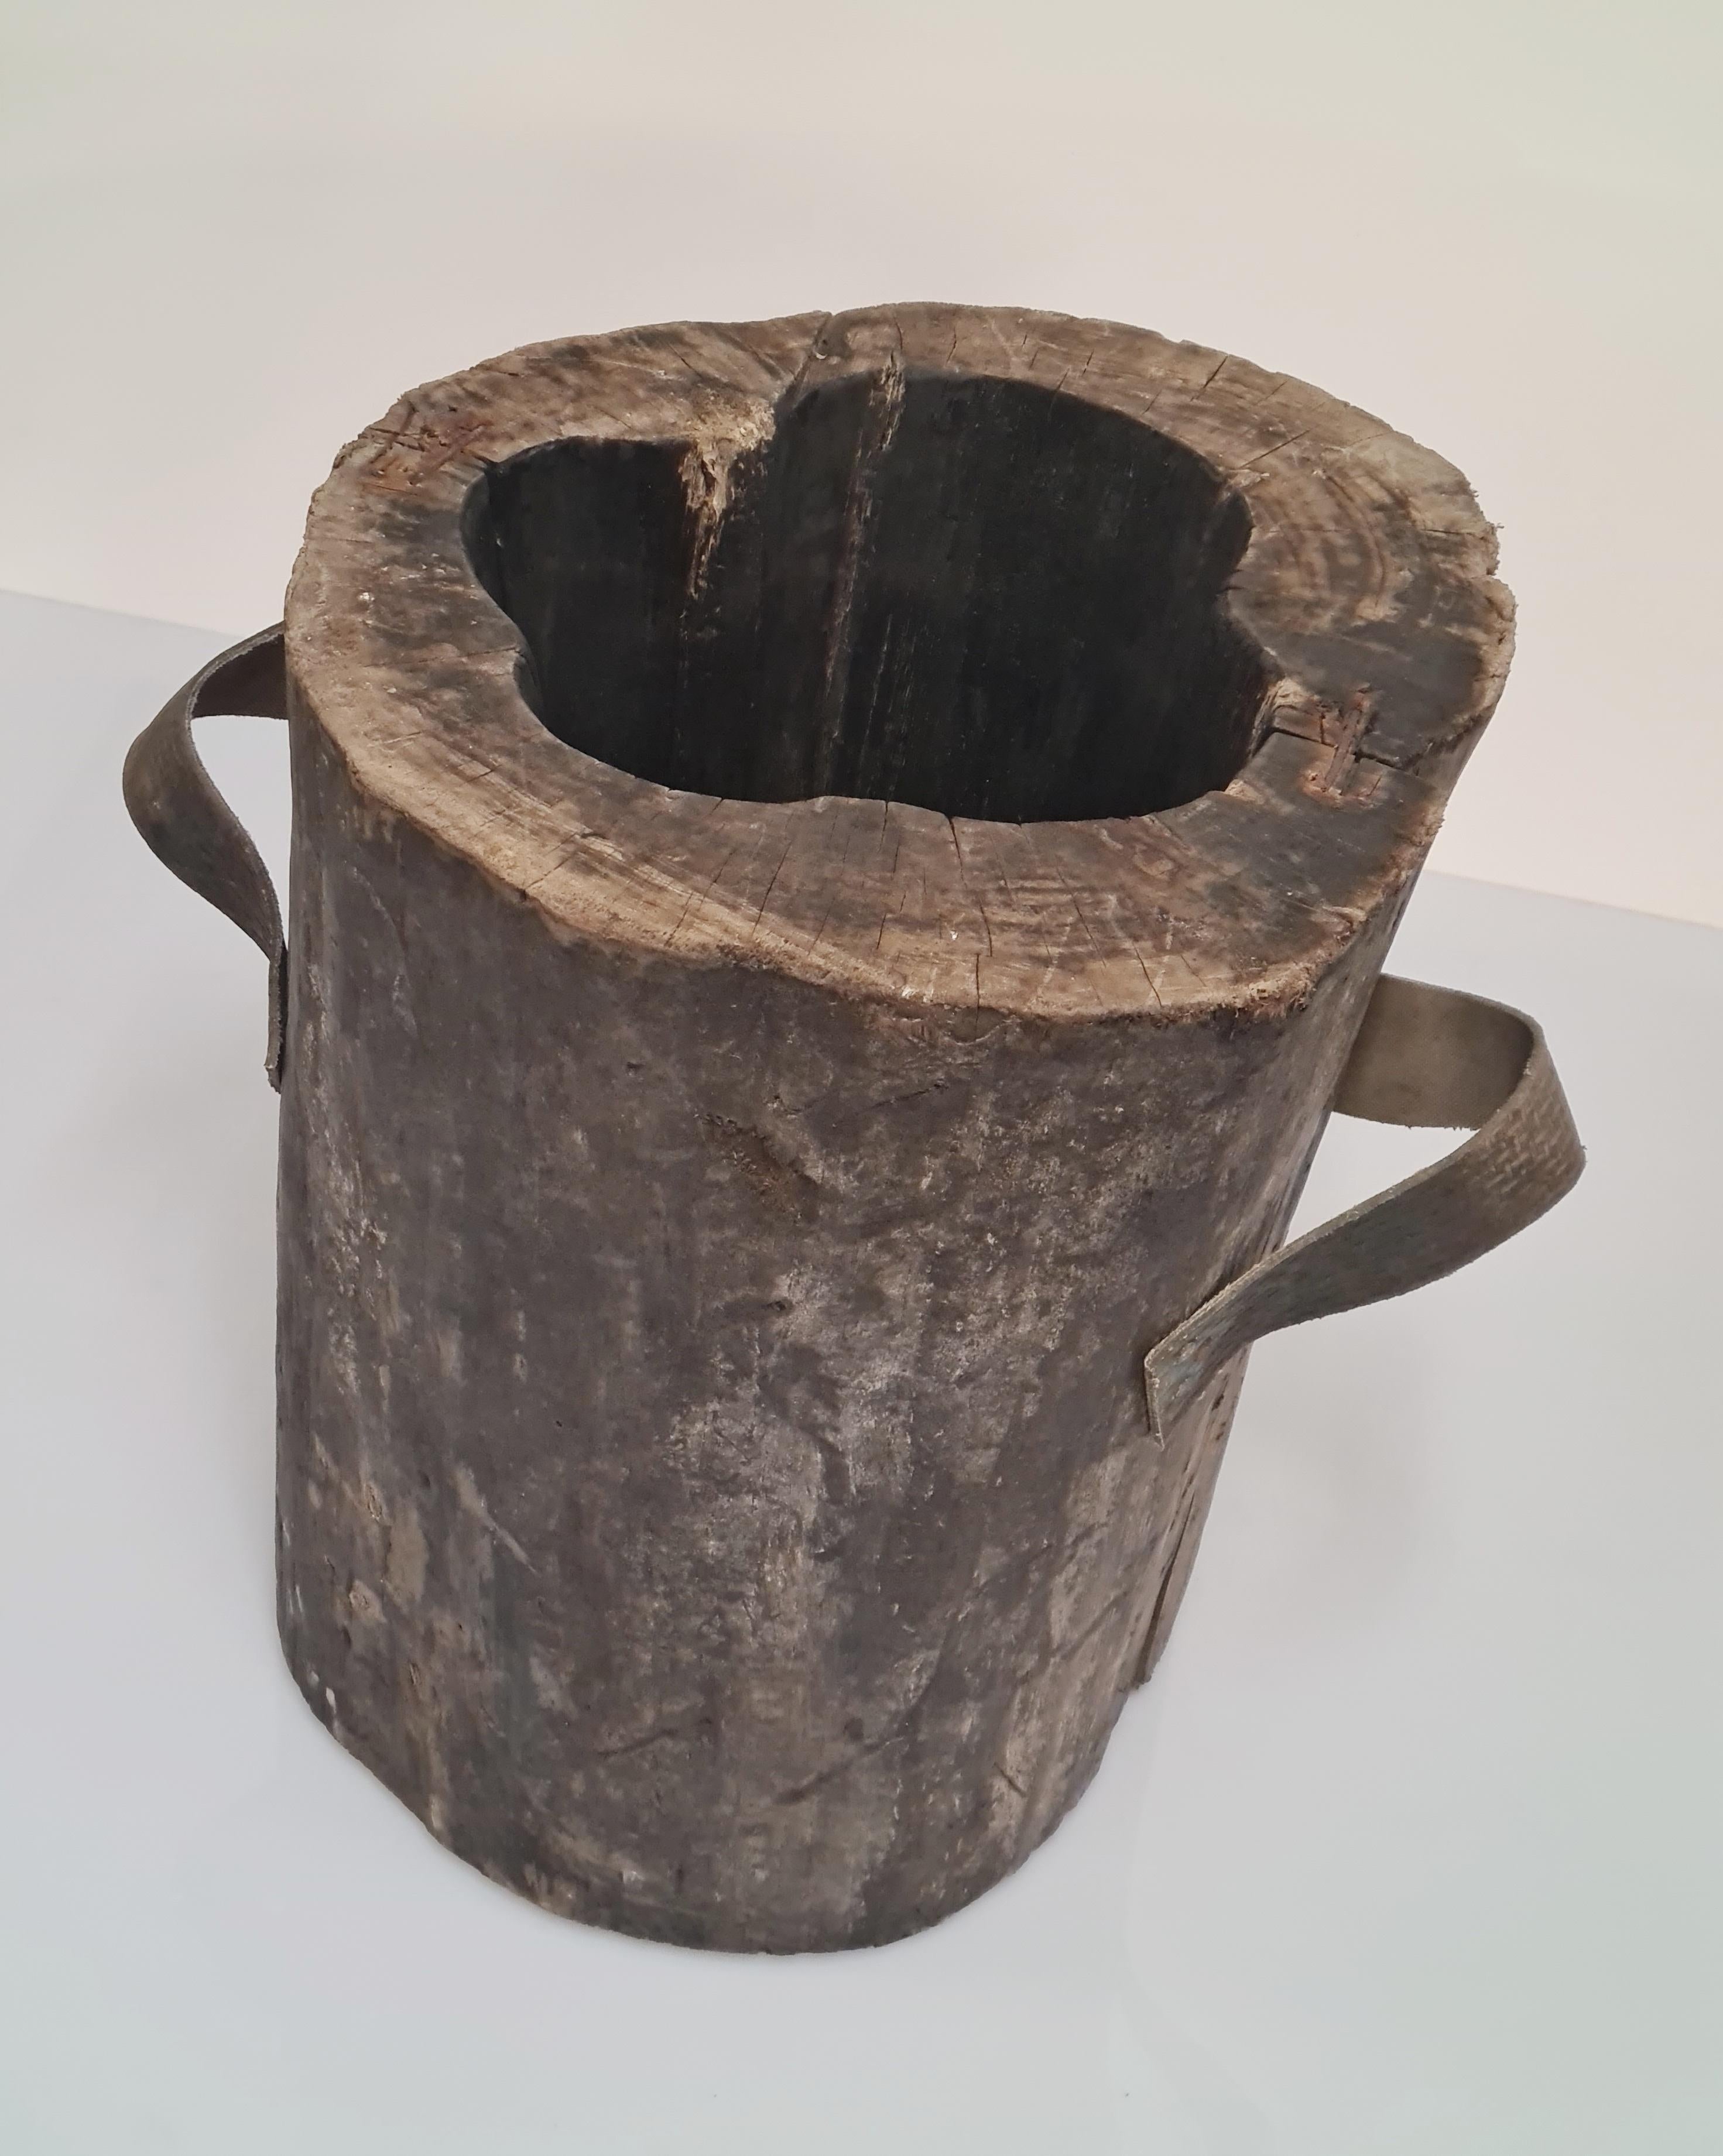 A collector's gem! Early Alvar Aalto hand carved wooden mould for the iconic vase no. 3032 which Aalto designed in the 1930s. 

The mould is hand carved from an older tree stump and has the original handles. The mould still retains the charred